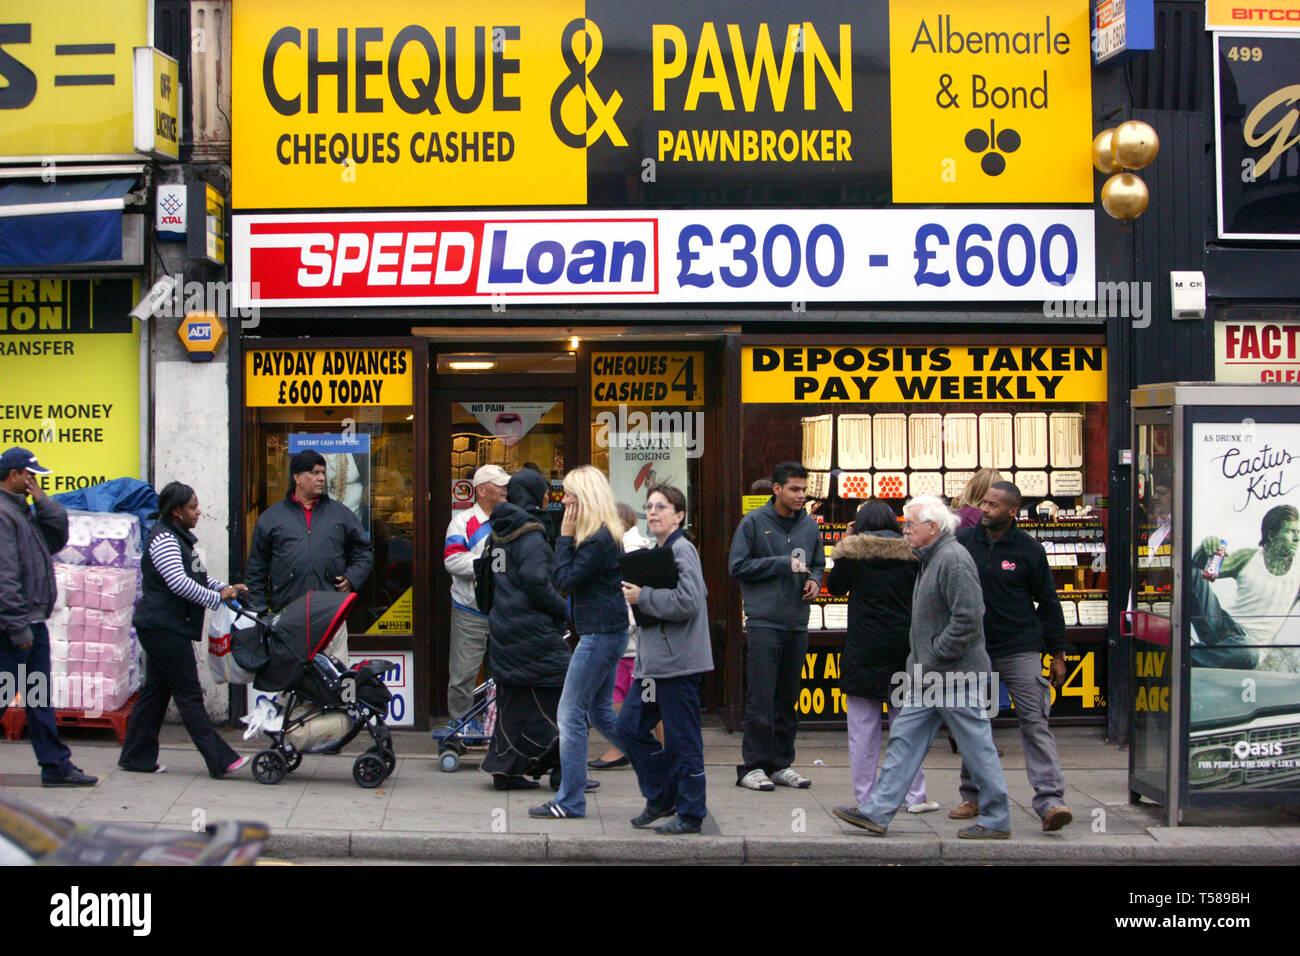 Pawnbroker, cheques cashed and speed loans. Wembley Central, London. 20/10/2008 Stock Photo